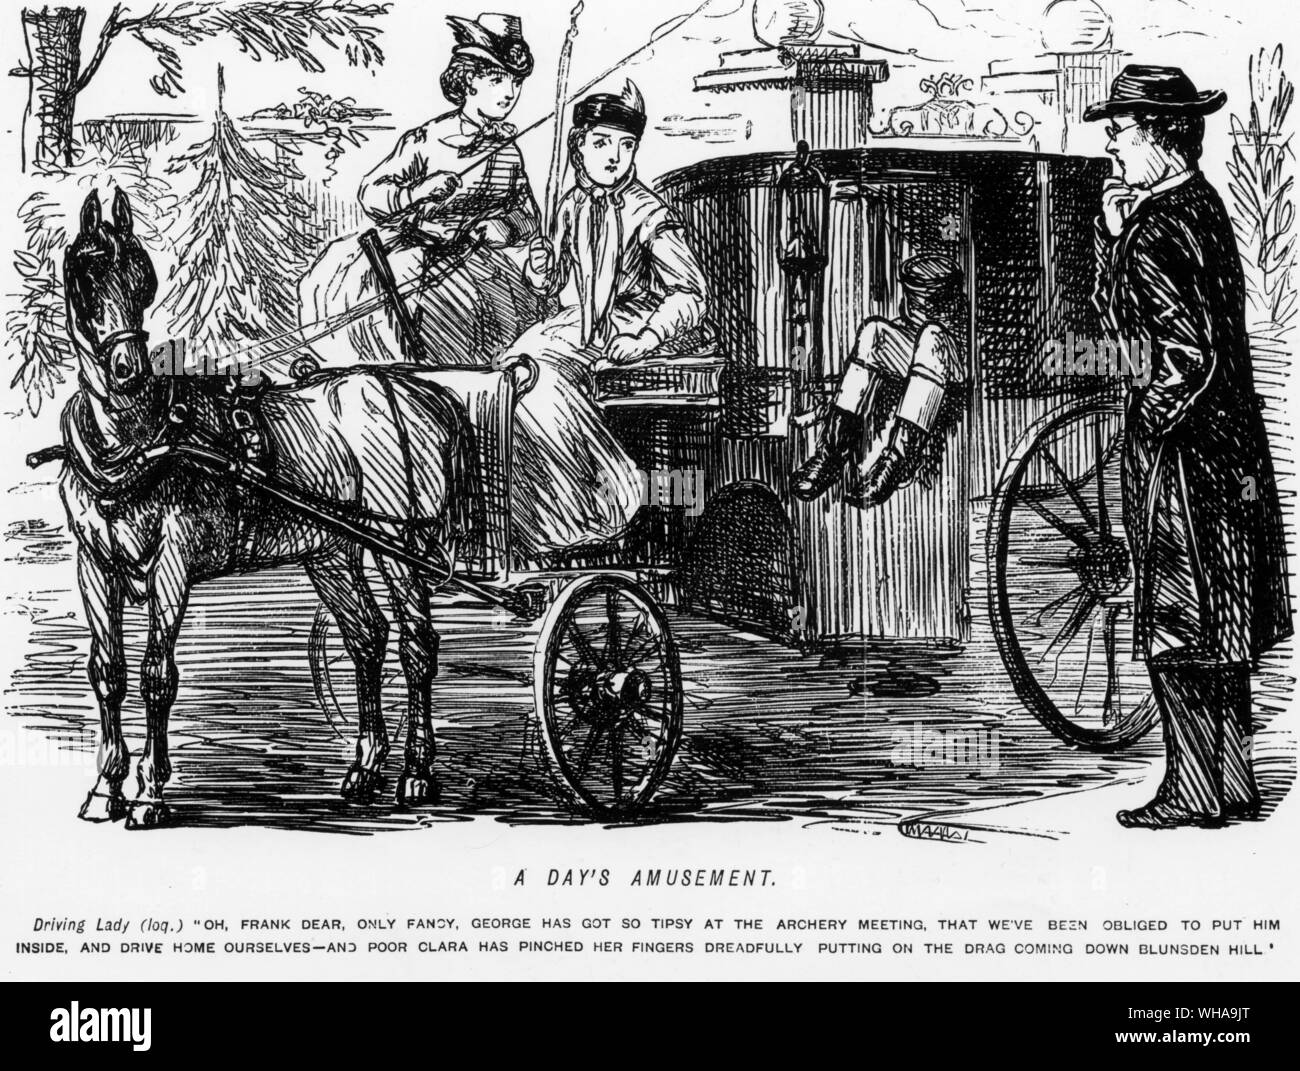 A Day's Amusement. Driving Lady ' Oh Frank dear, only fancy, George has got so tipsy at the archery meeting, that we've been obliged to put him inside,and drive home ourselves - and poor Clara has pinched her fingers dreadfully putting on the drag coming down Blunsden Hill. Stock Photo